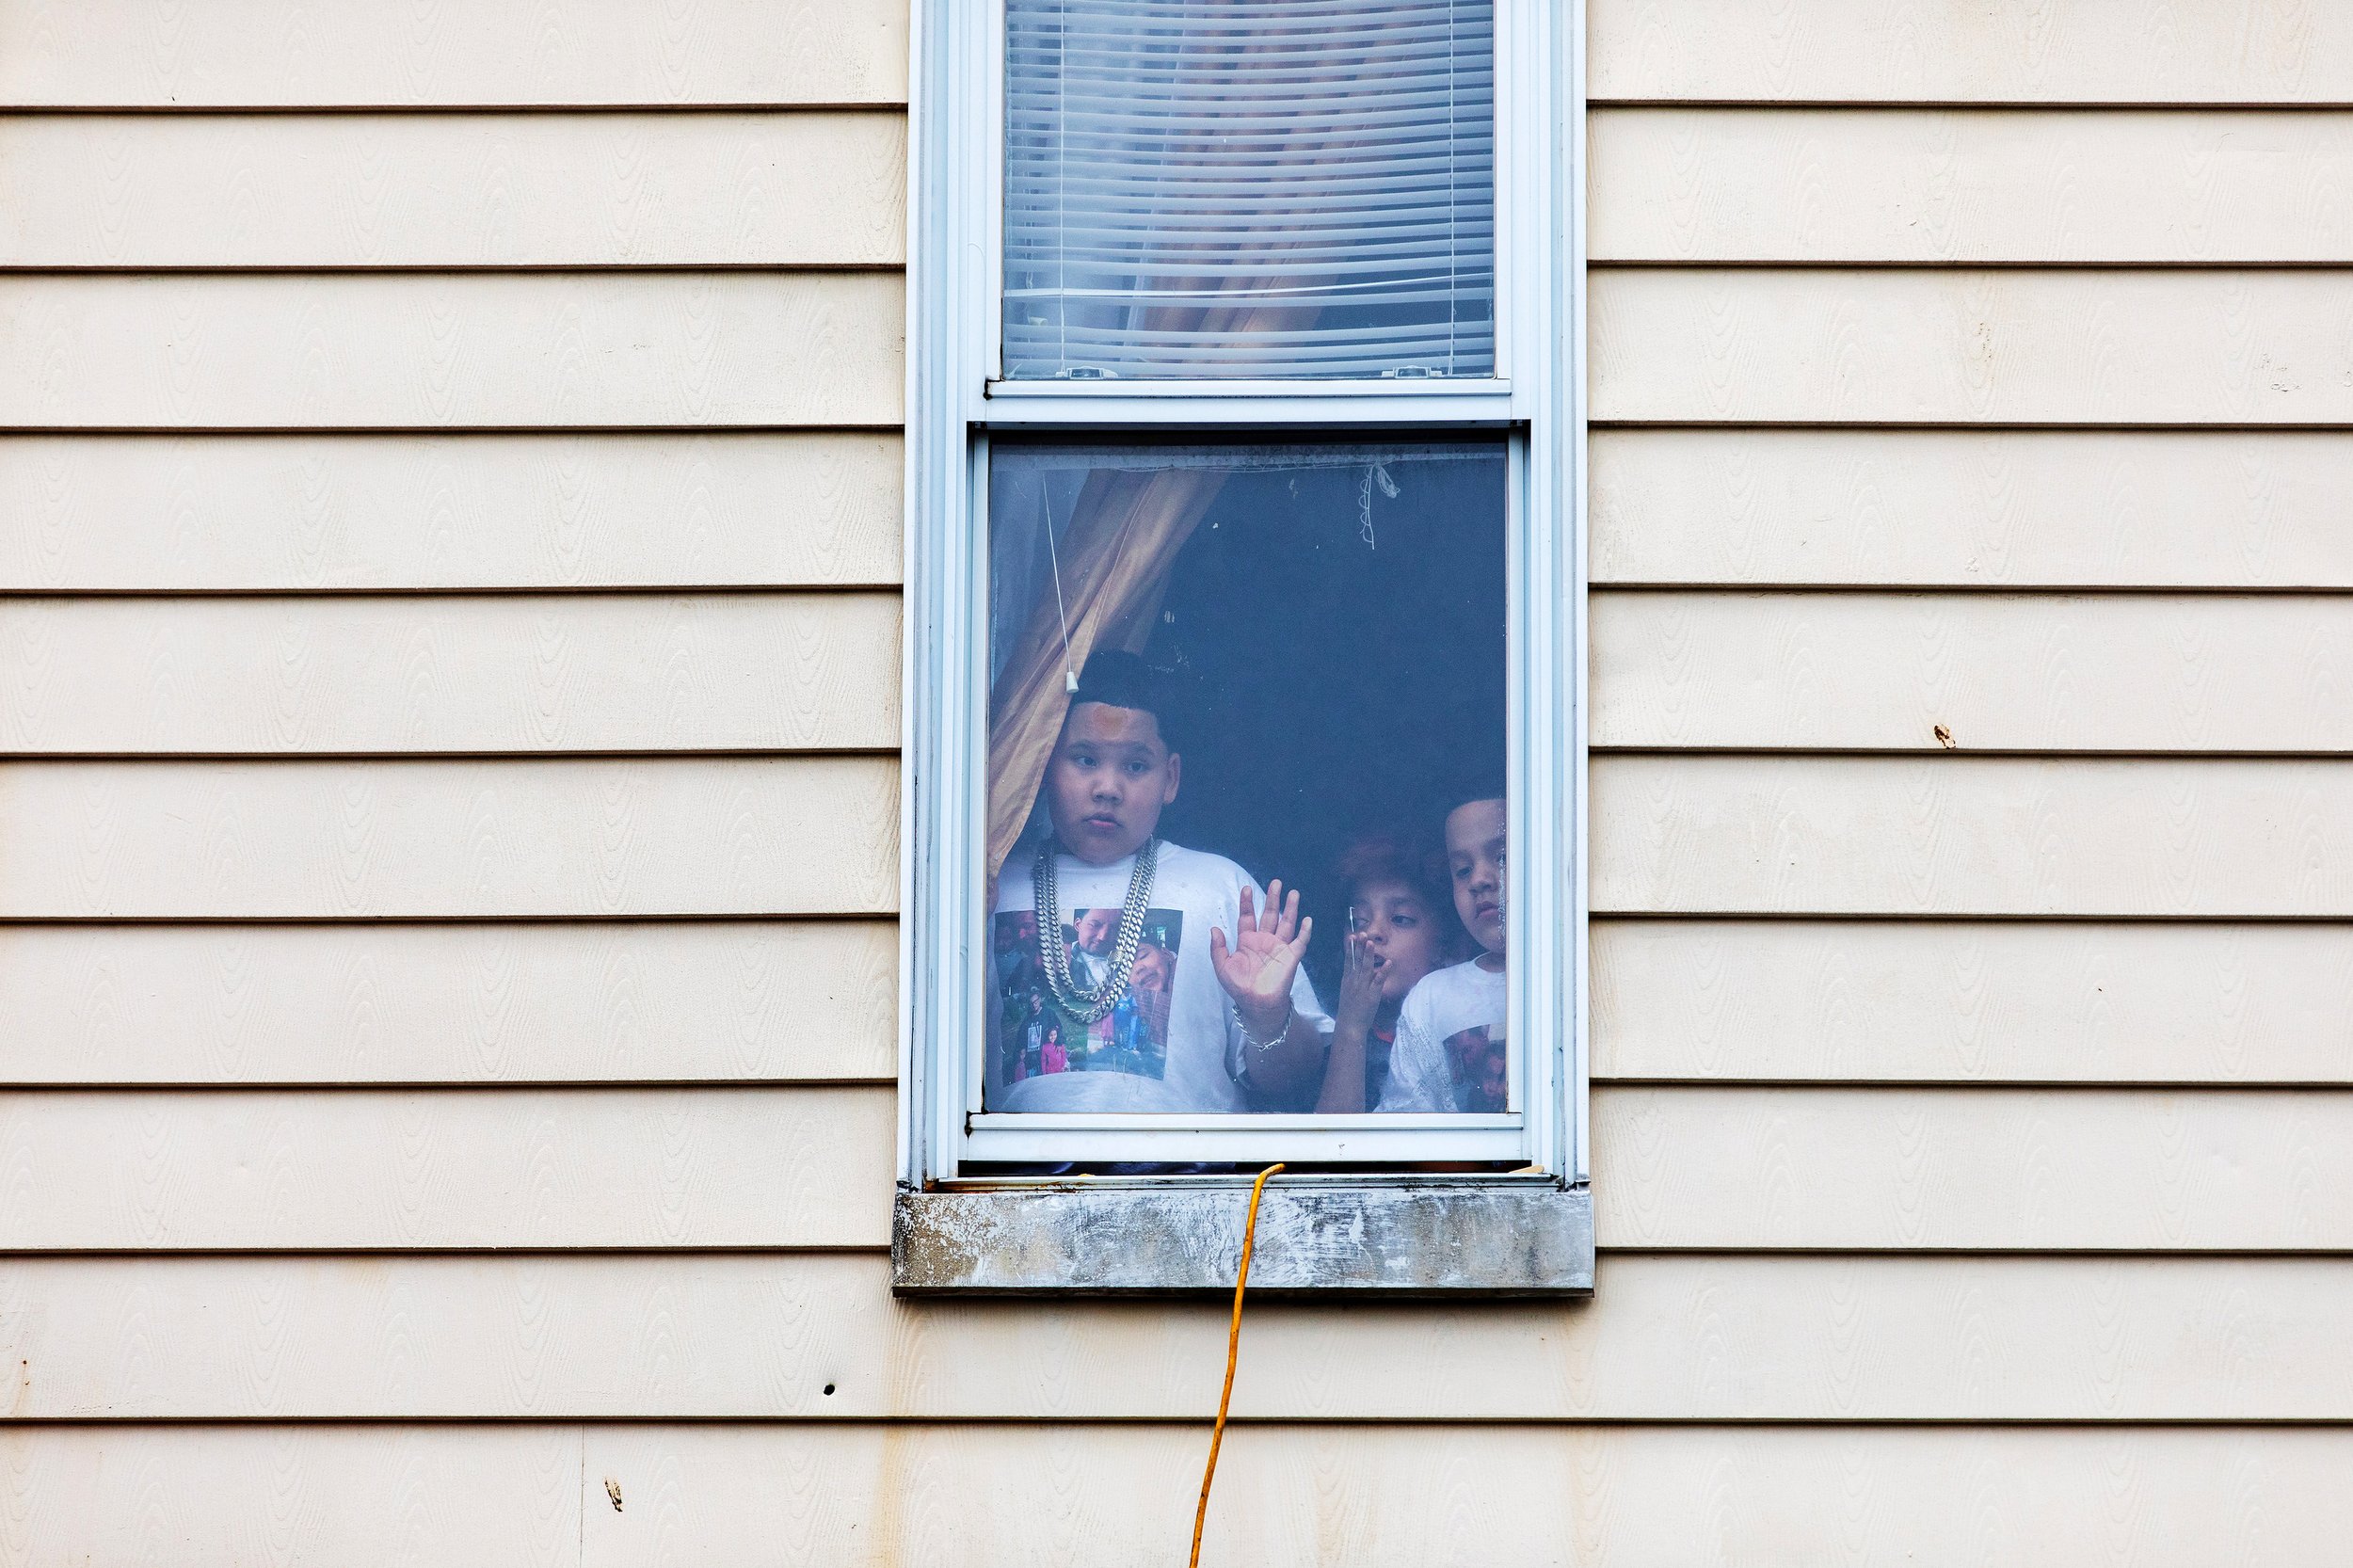  Locals watch from inside as NYPD officers investigate a 911 call regarding individuals breaking social distance rules at an outdoor street cookout during the Covid-19 Pandemic in Brownsville Brooklyn, New York.    